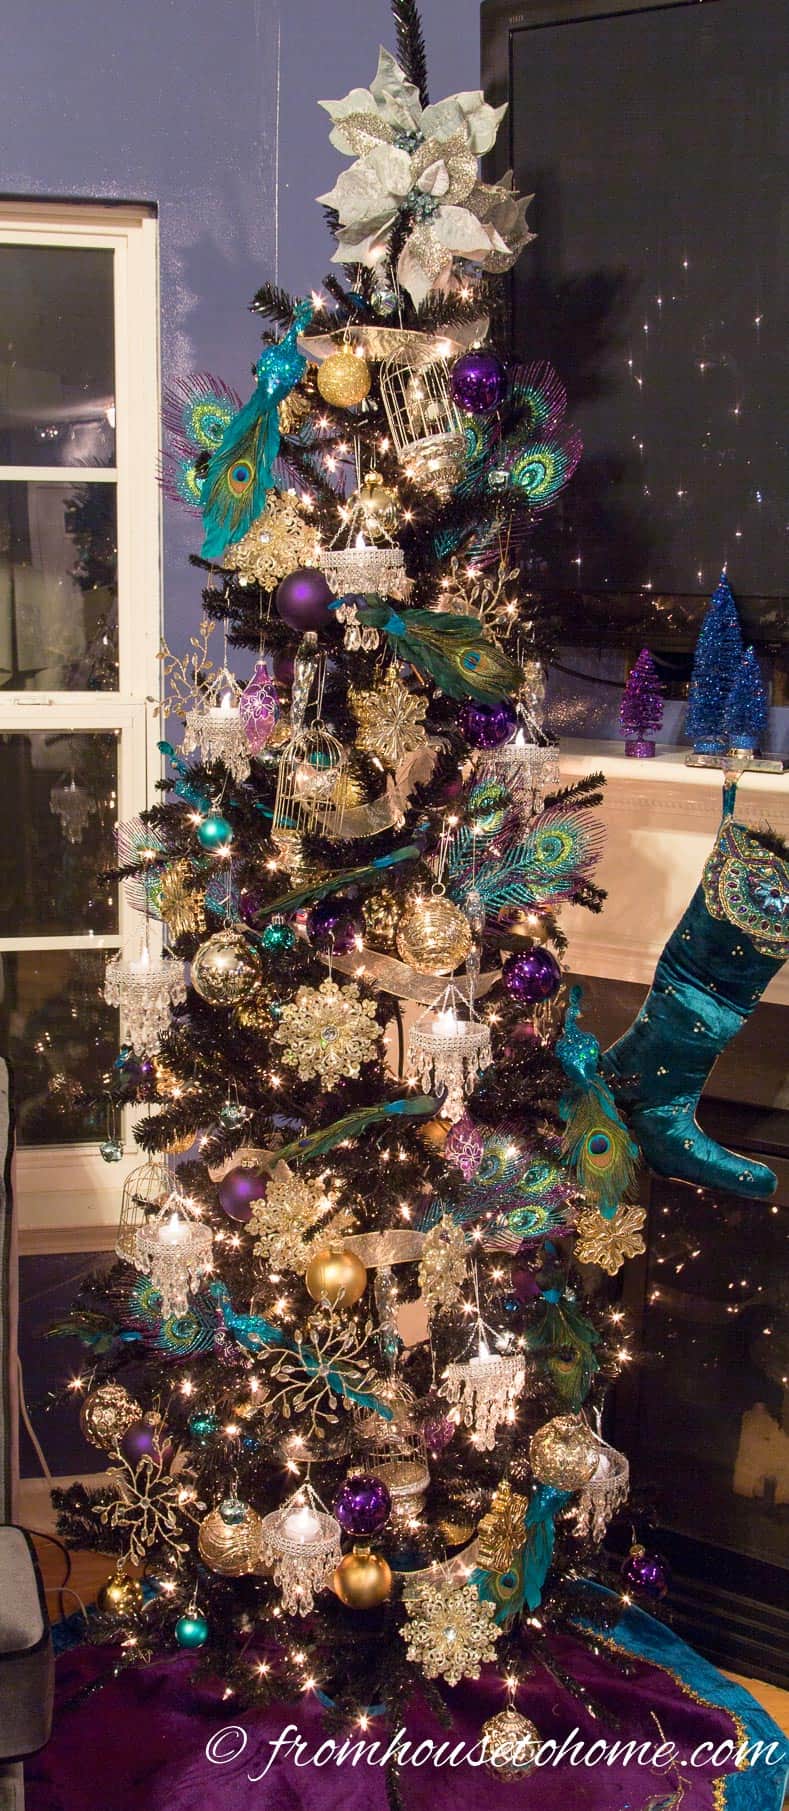 The peacock-inspired Christmas tree | How To Decorate a Beautiful Christmas Tree